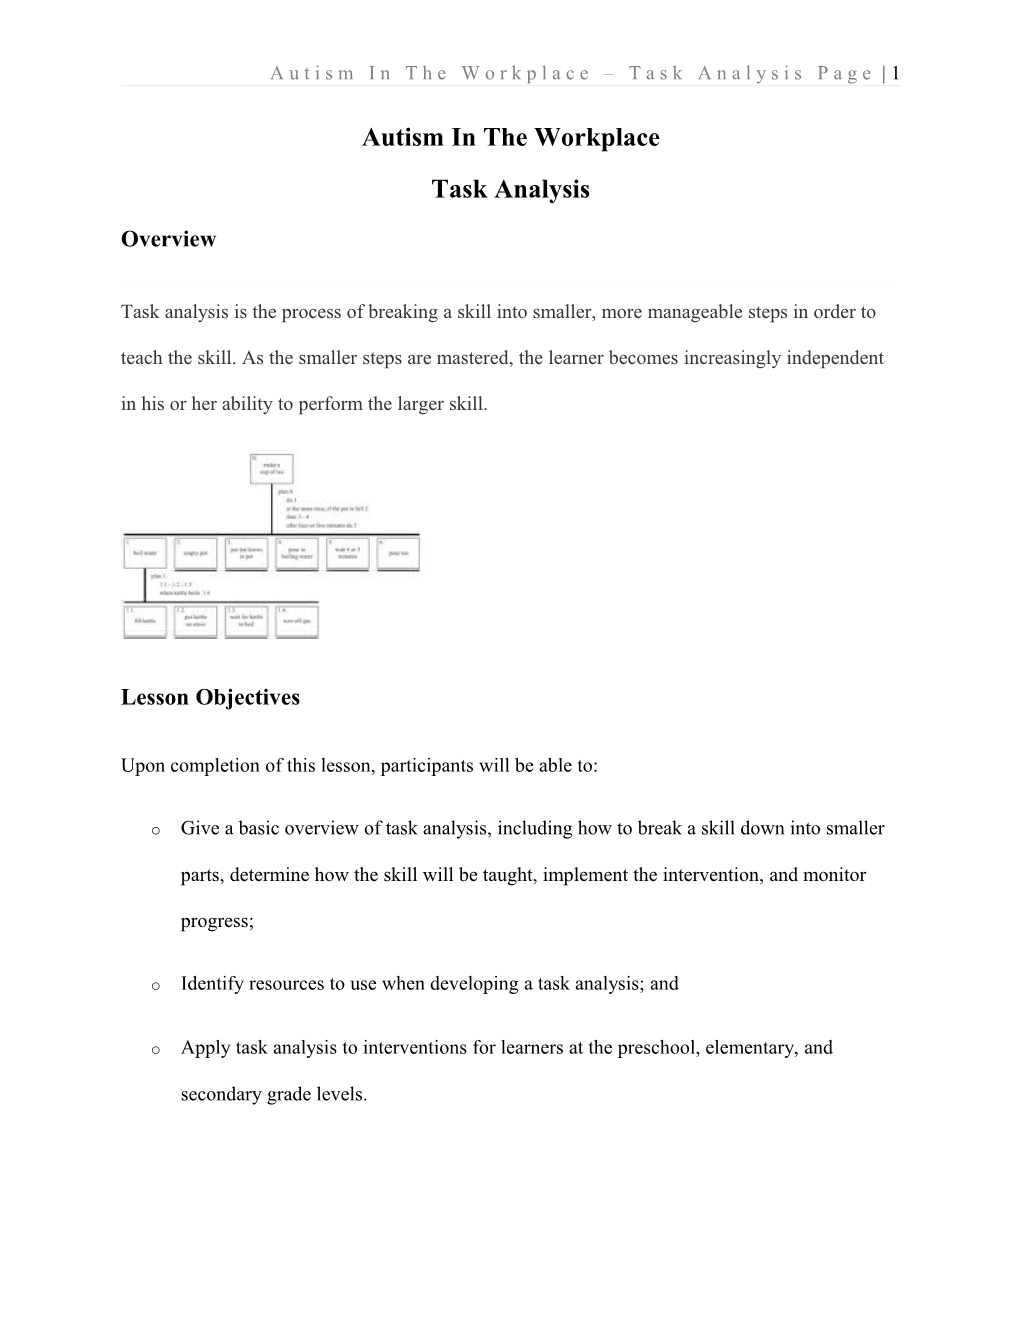 Autism in the Workplace Task Analysis Page 24